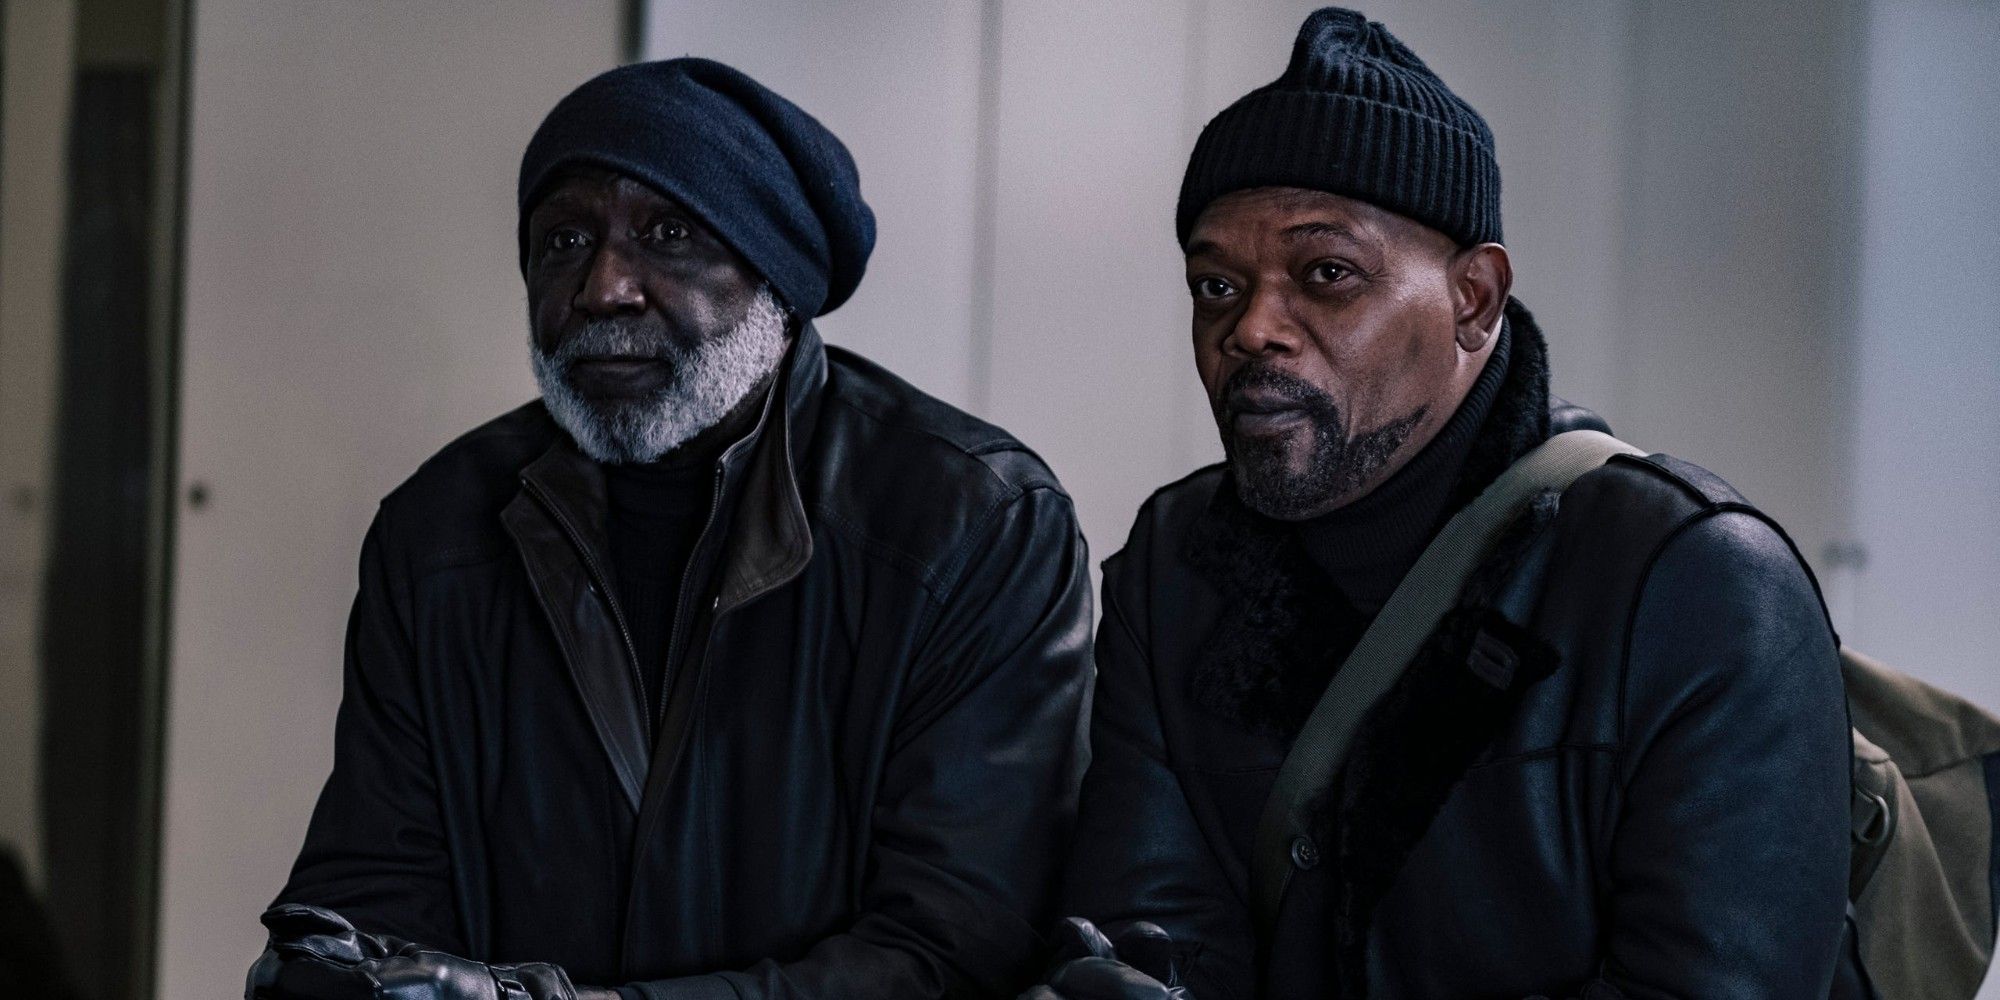 The PI John Shaft chats with his father in Shaft 2019